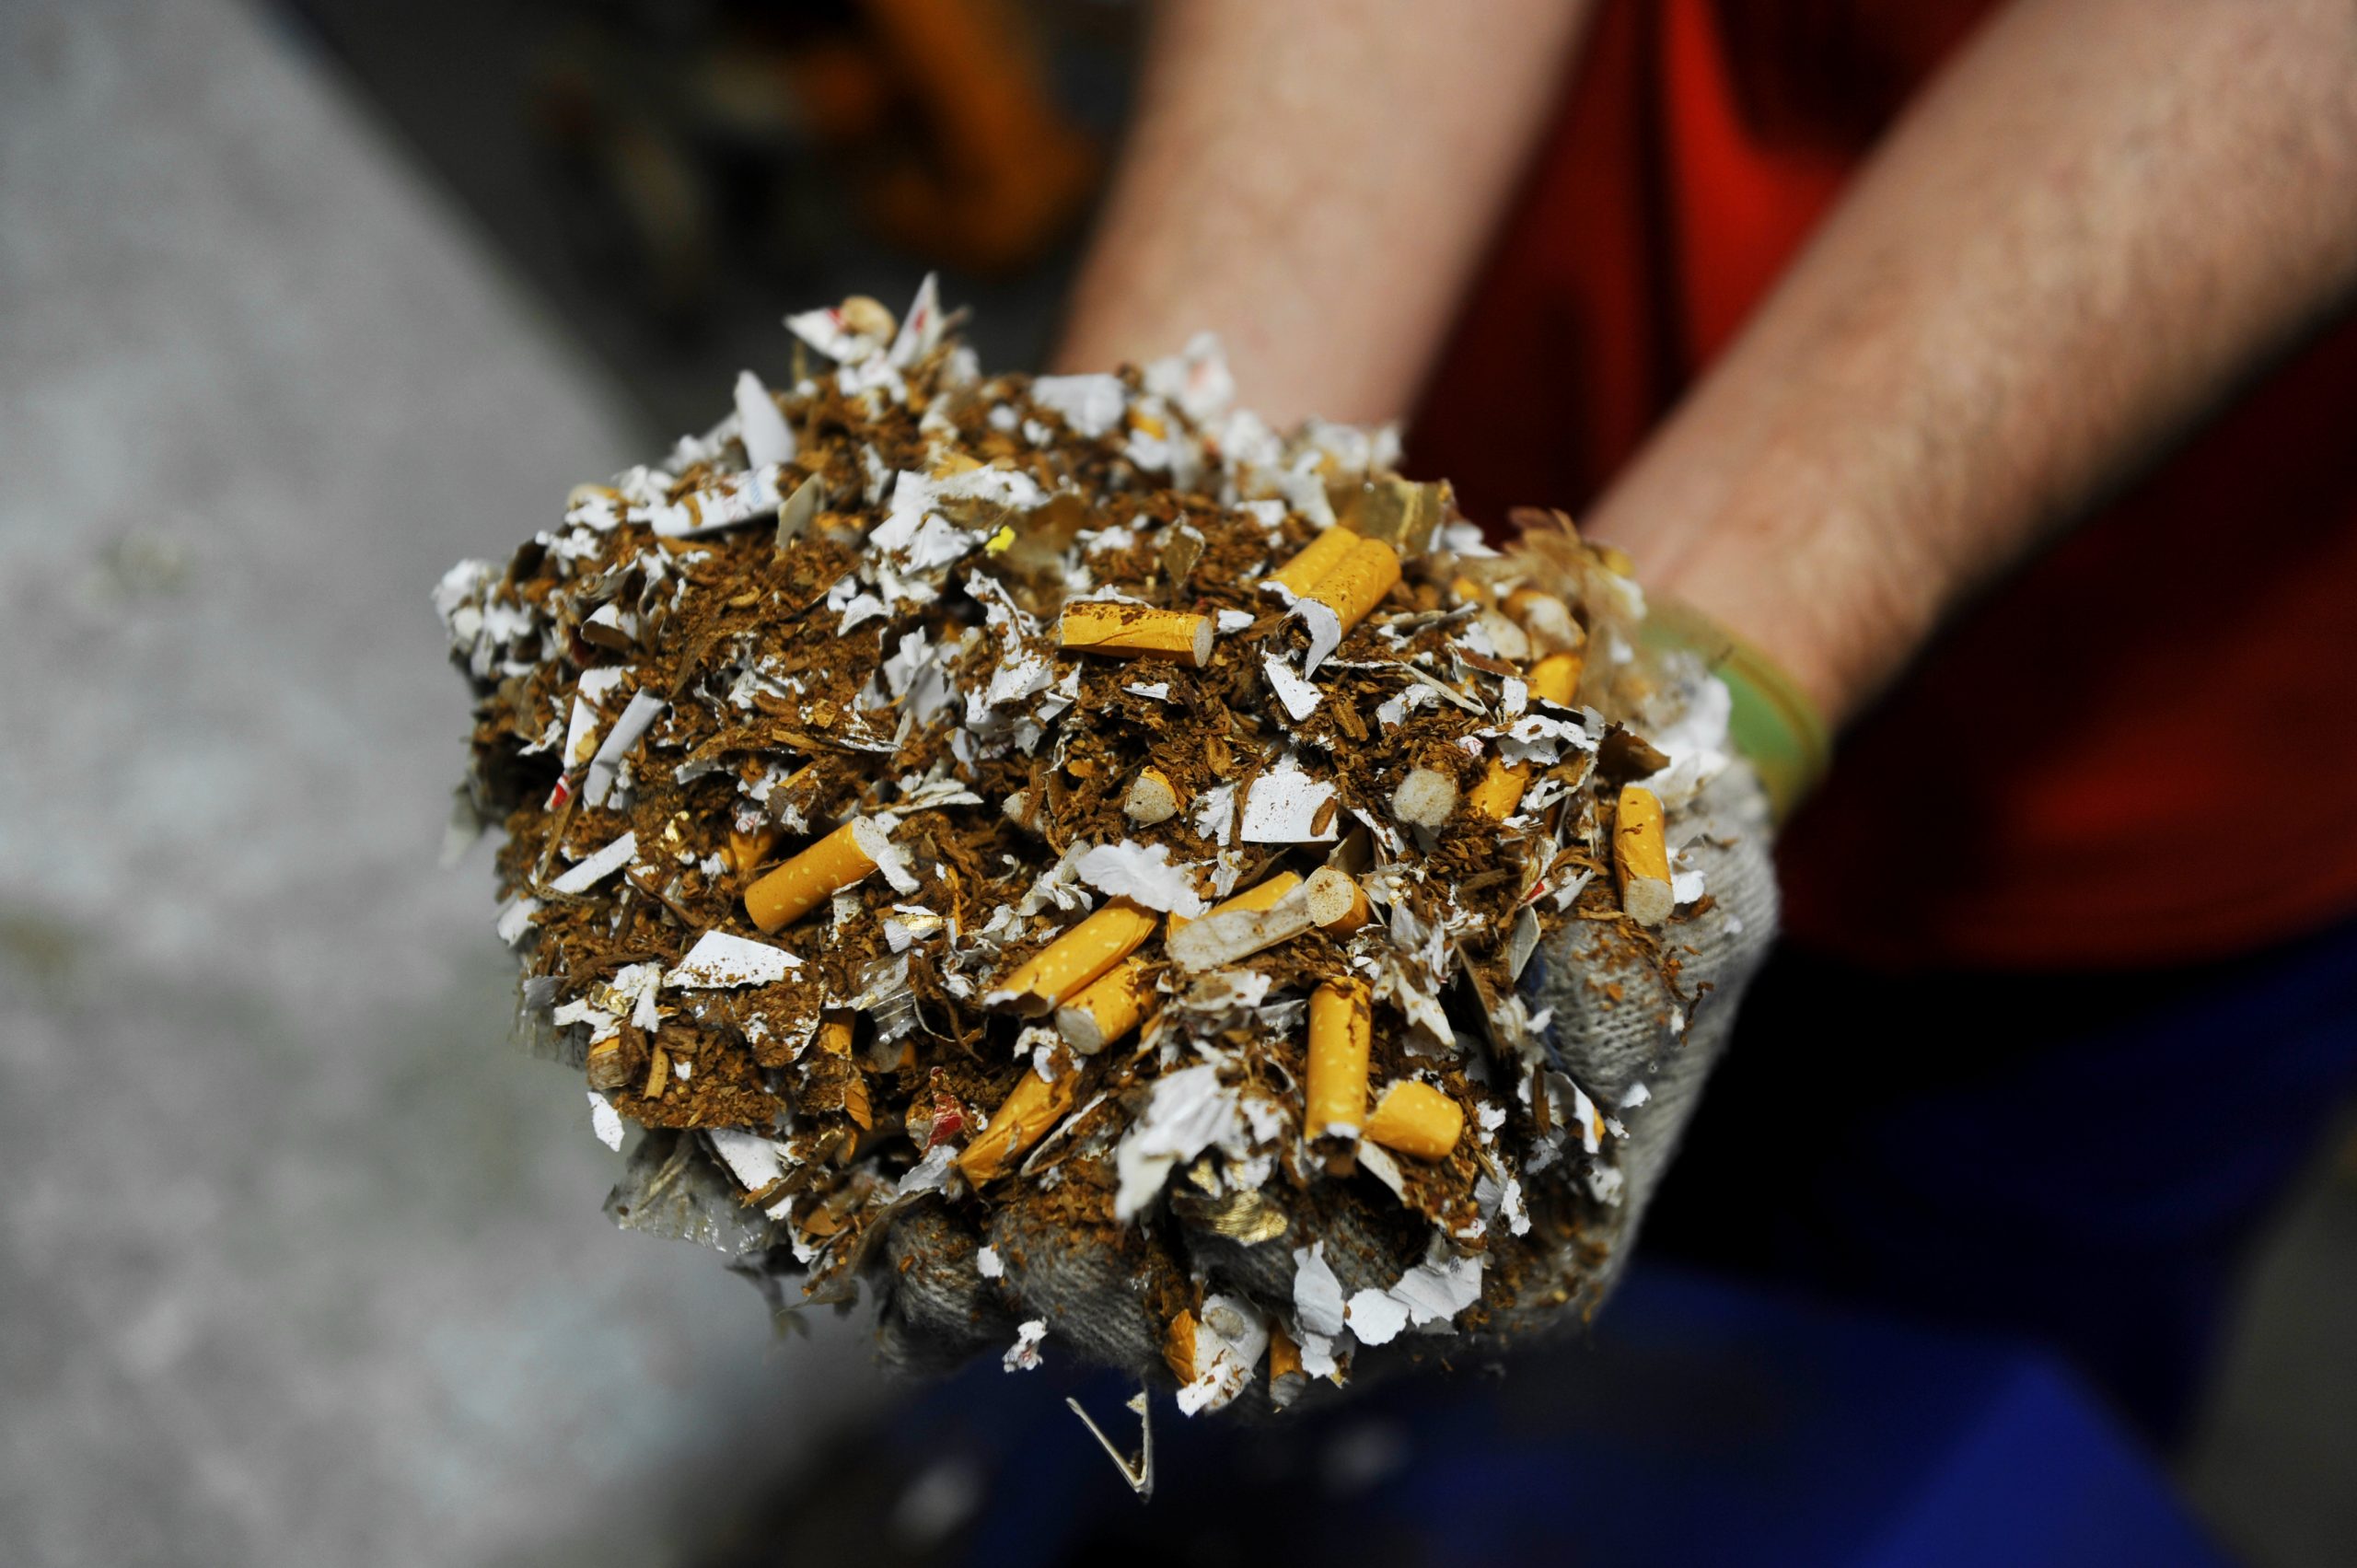 Crackdown on illegal tobacco trade online